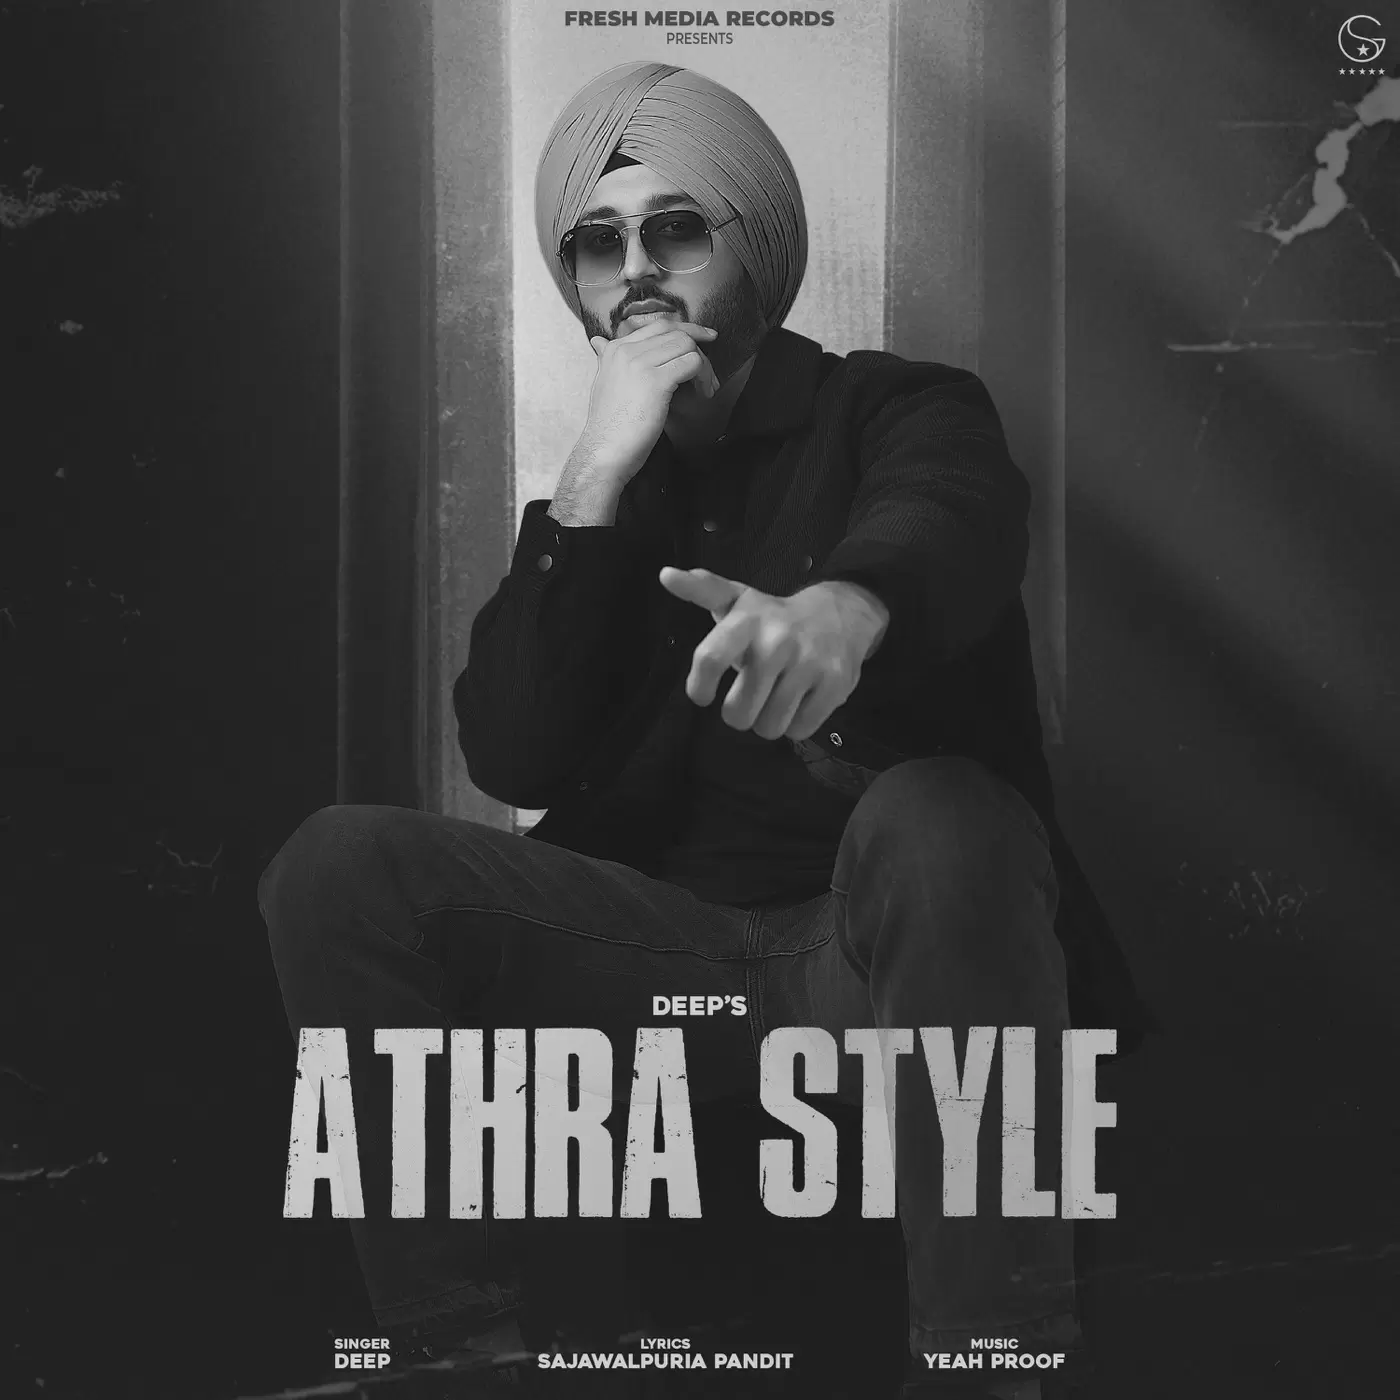 Athra Style Deep Mp3 Download Song - Mr-Punjab